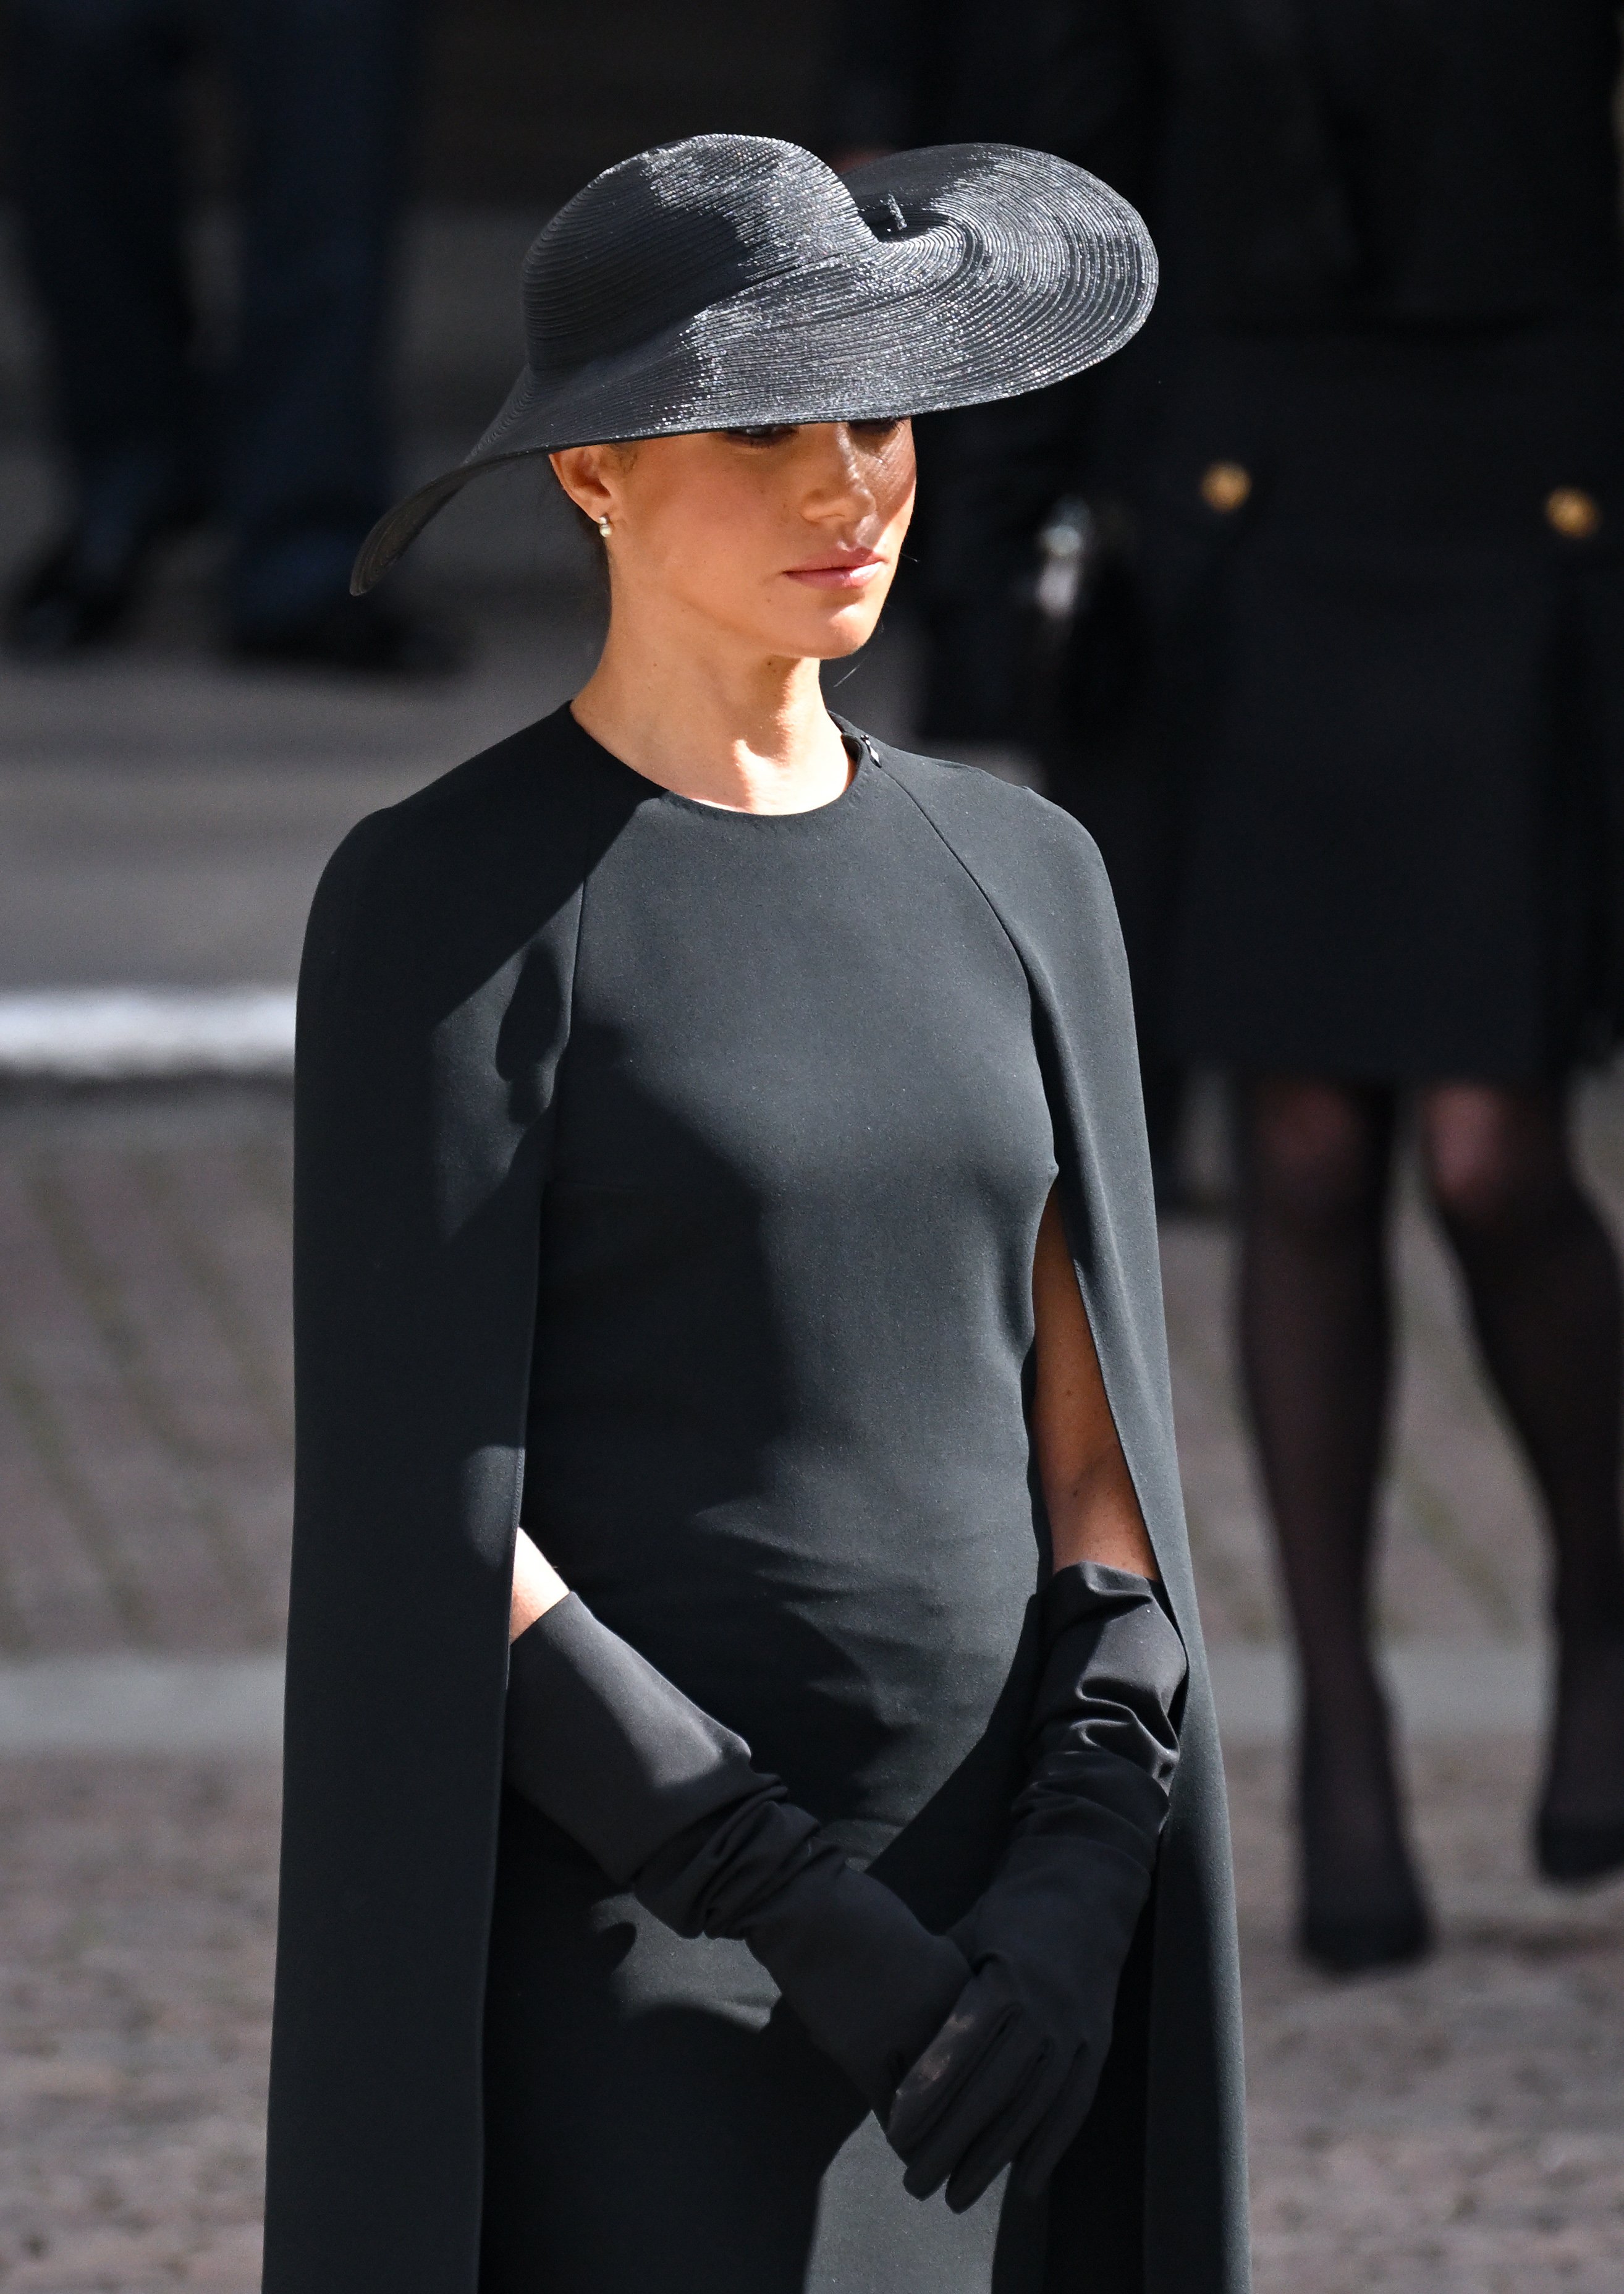     Meghan, Duchess of Sussex during Queen Elizabeth II's State Funeral at Westminster Abbey on September 19, 2022 in London, England |  Source: Getty Images 